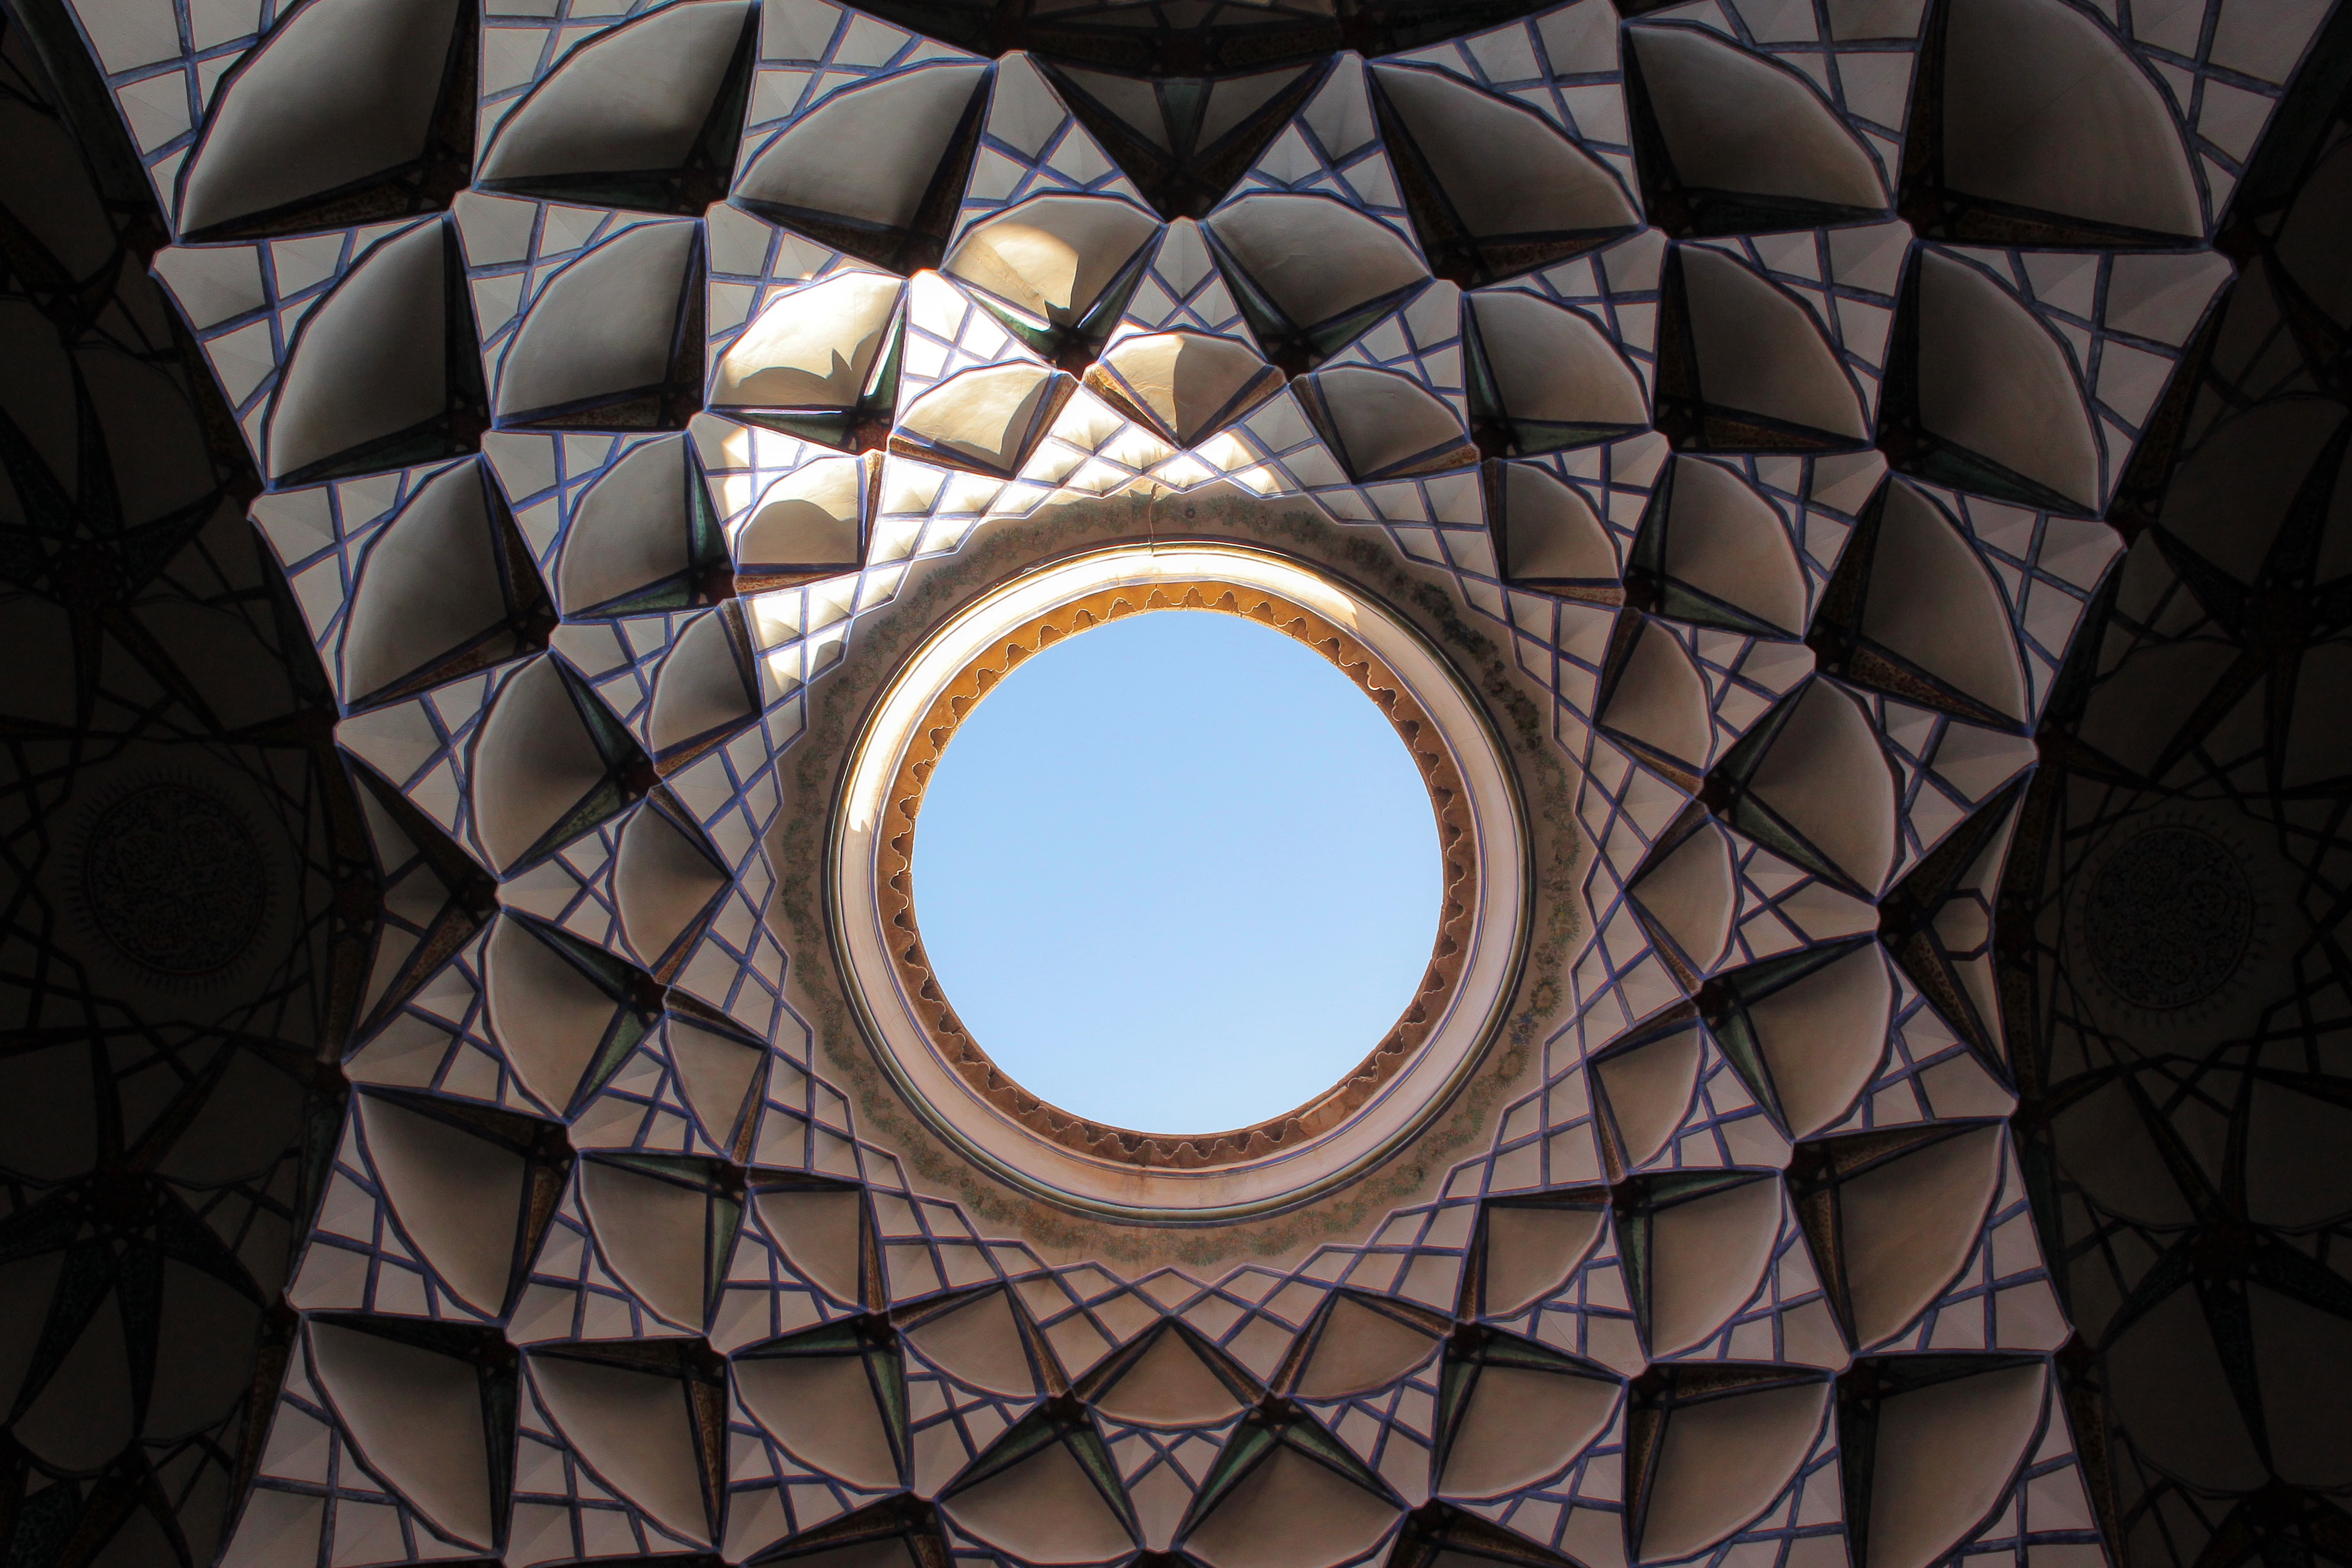 Upward view of the sky through a circular opening in an ornate ceiling